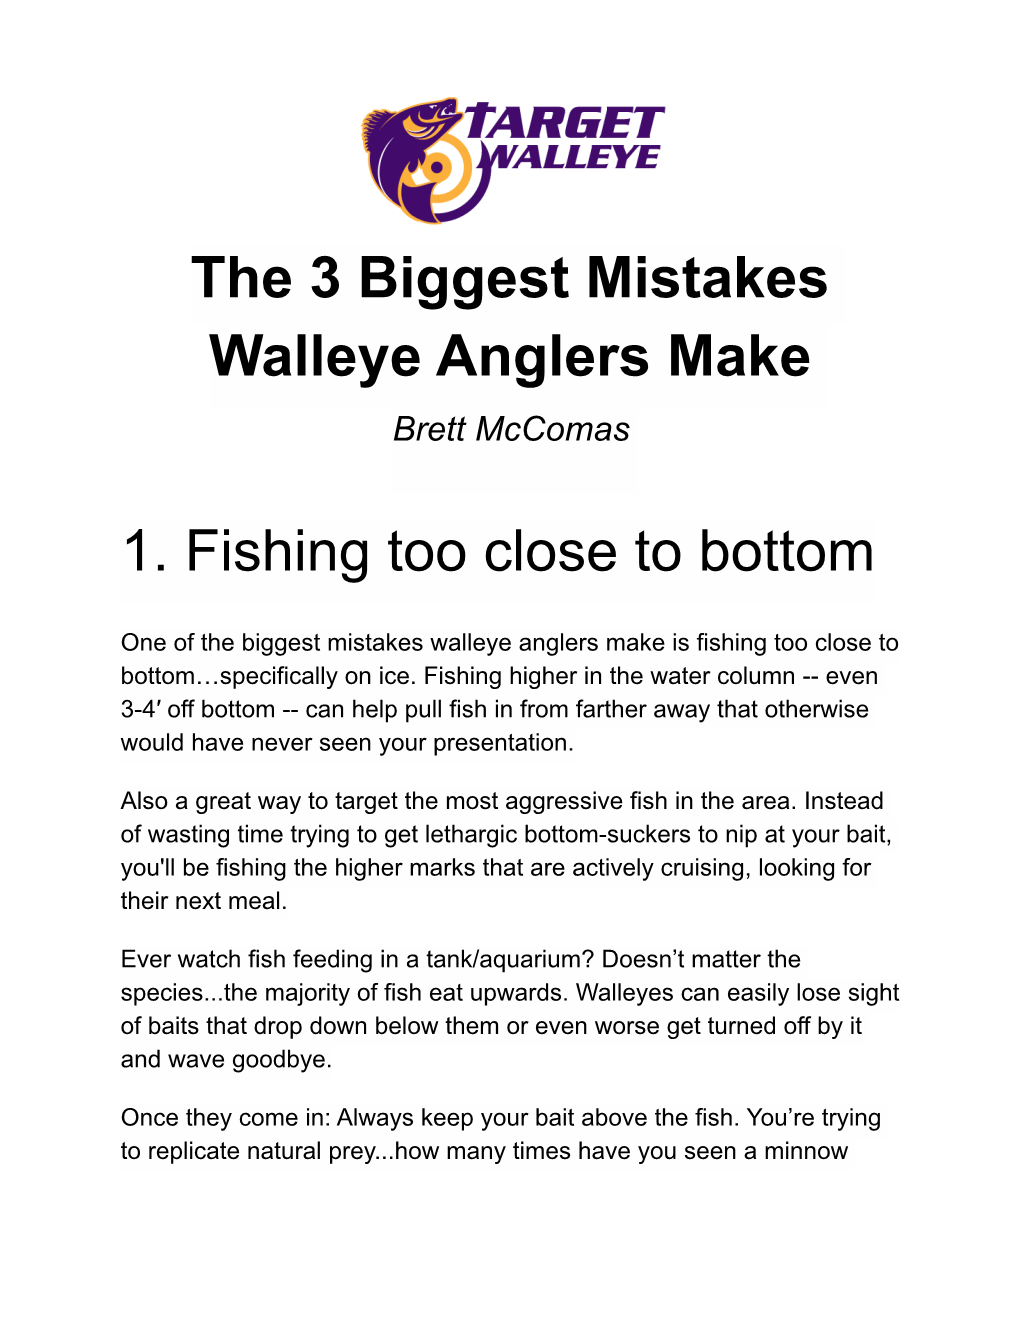 The 3 Biggest Mistakes Walleye Anglers Make 1. Fishing Too Close to Bottom